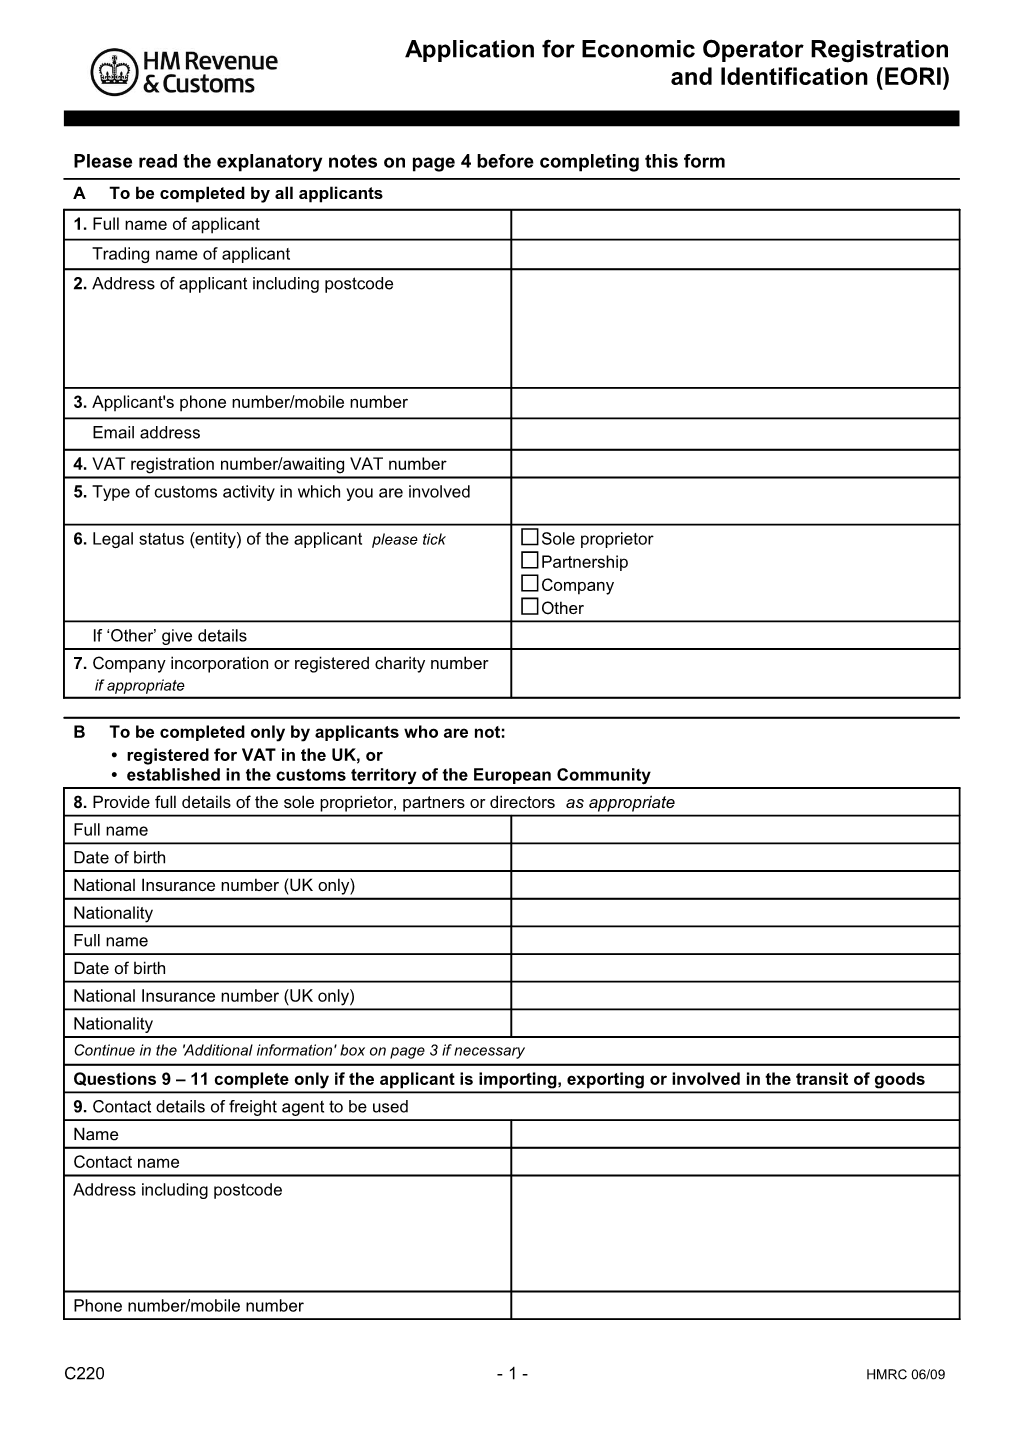 Please Read the Explanatory Notes on Page 4 Before Completing This Form